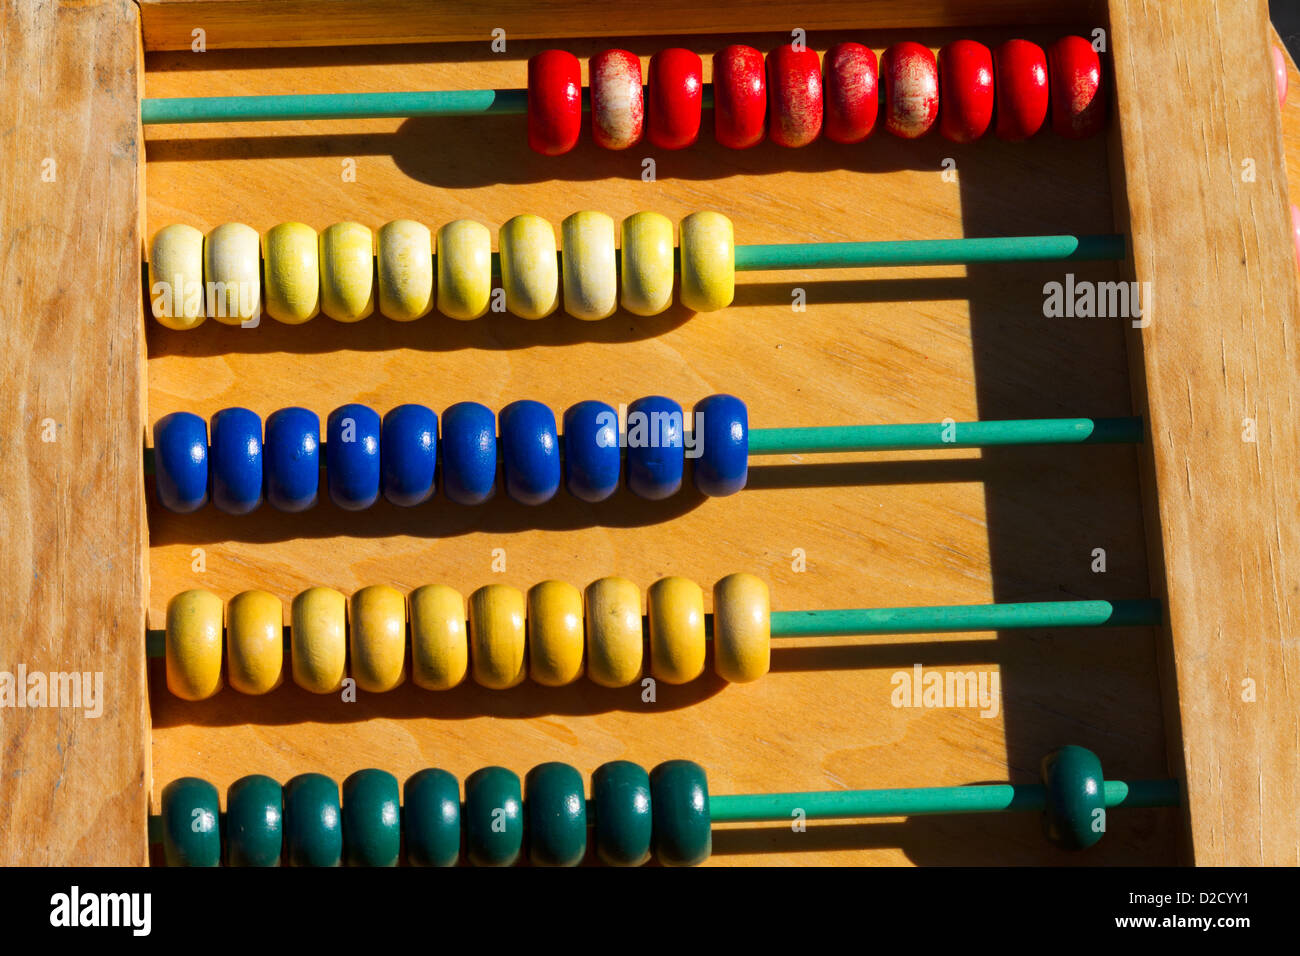 A toy abacus with brightly colored counters and rods. Stock Photo